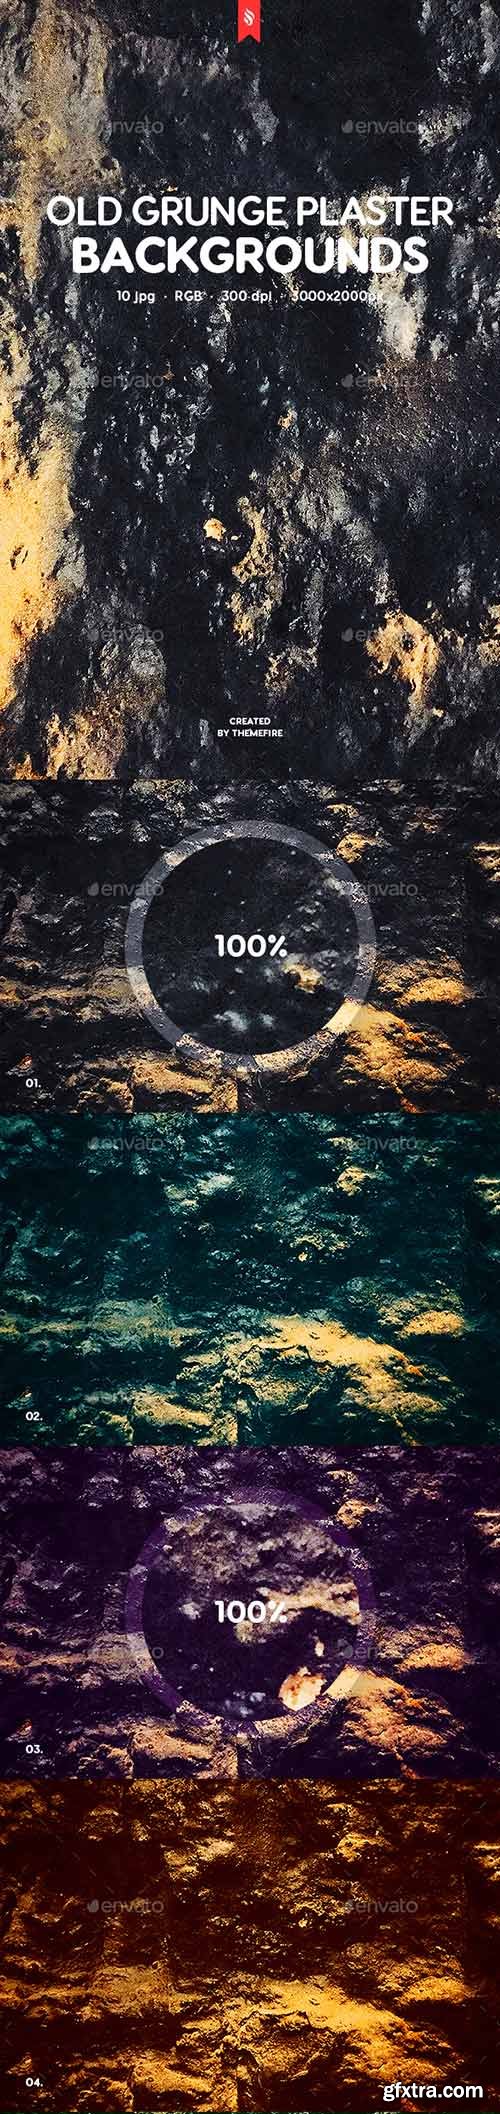 Graphicriver - Old Grunge Plaster Texture Backgrounds 20051667